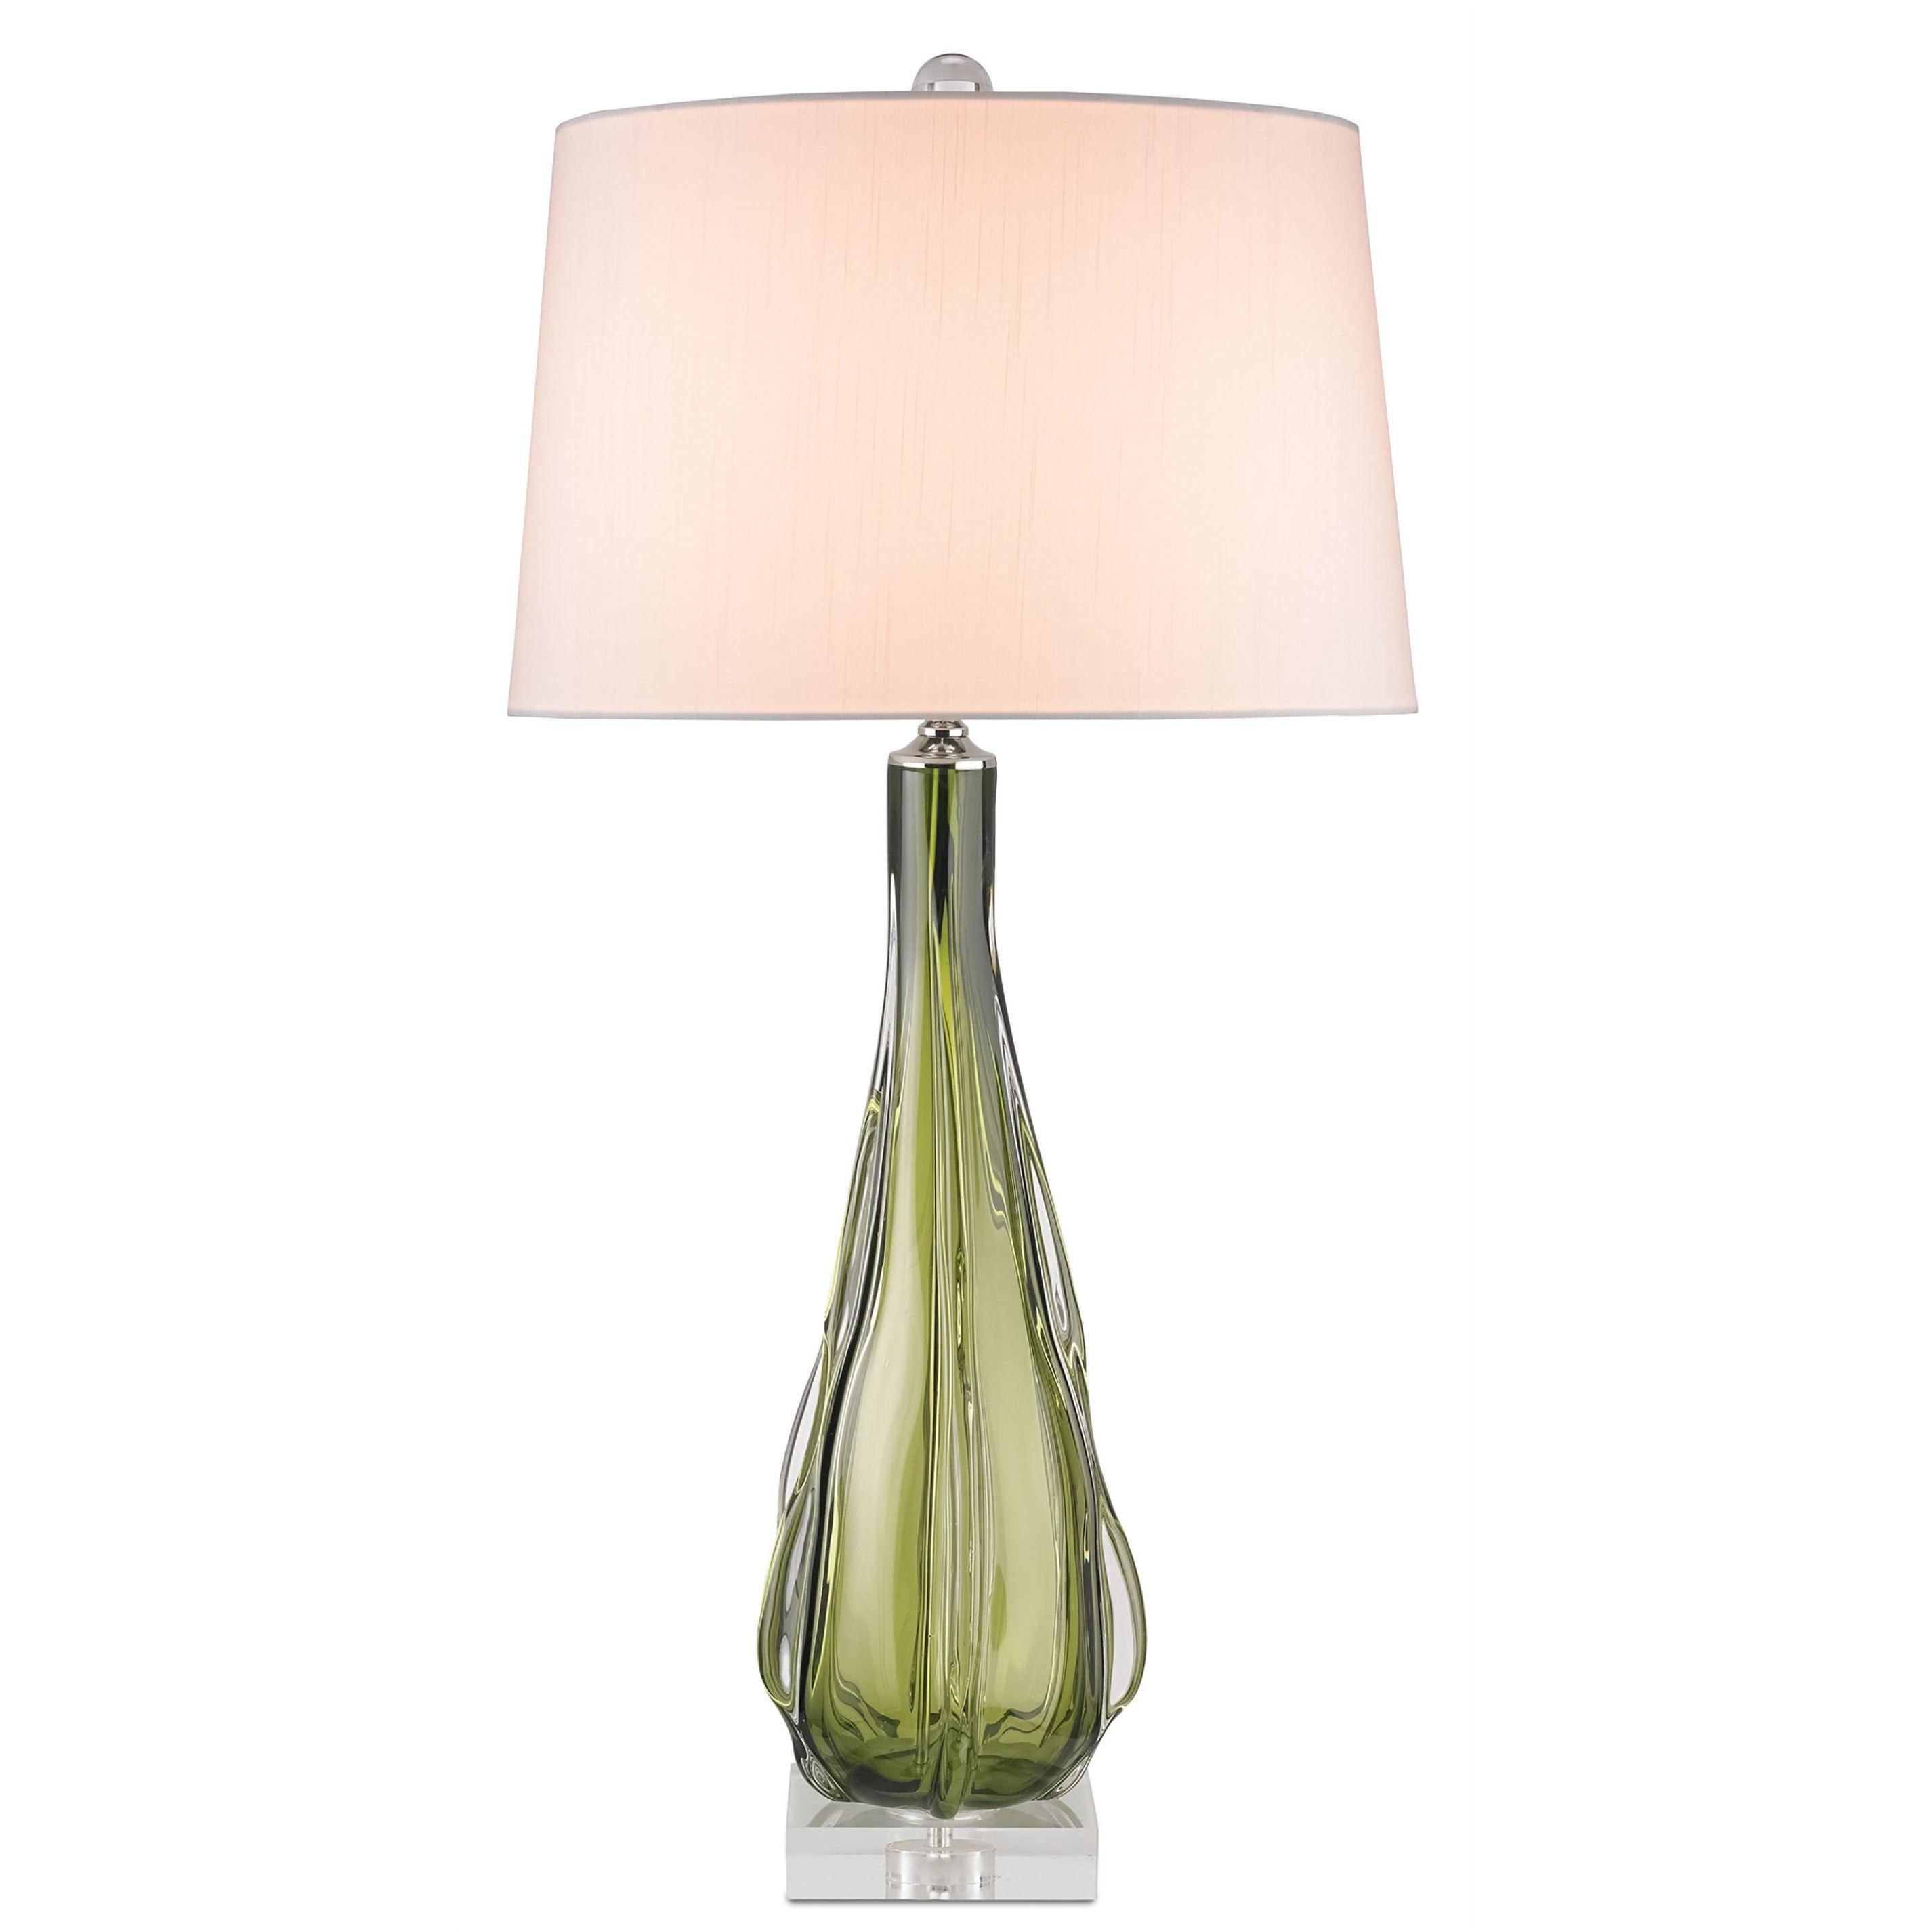 Currey and Company - Zephyr Table Lamp - 6674 | Montreal Lighting & Hardware